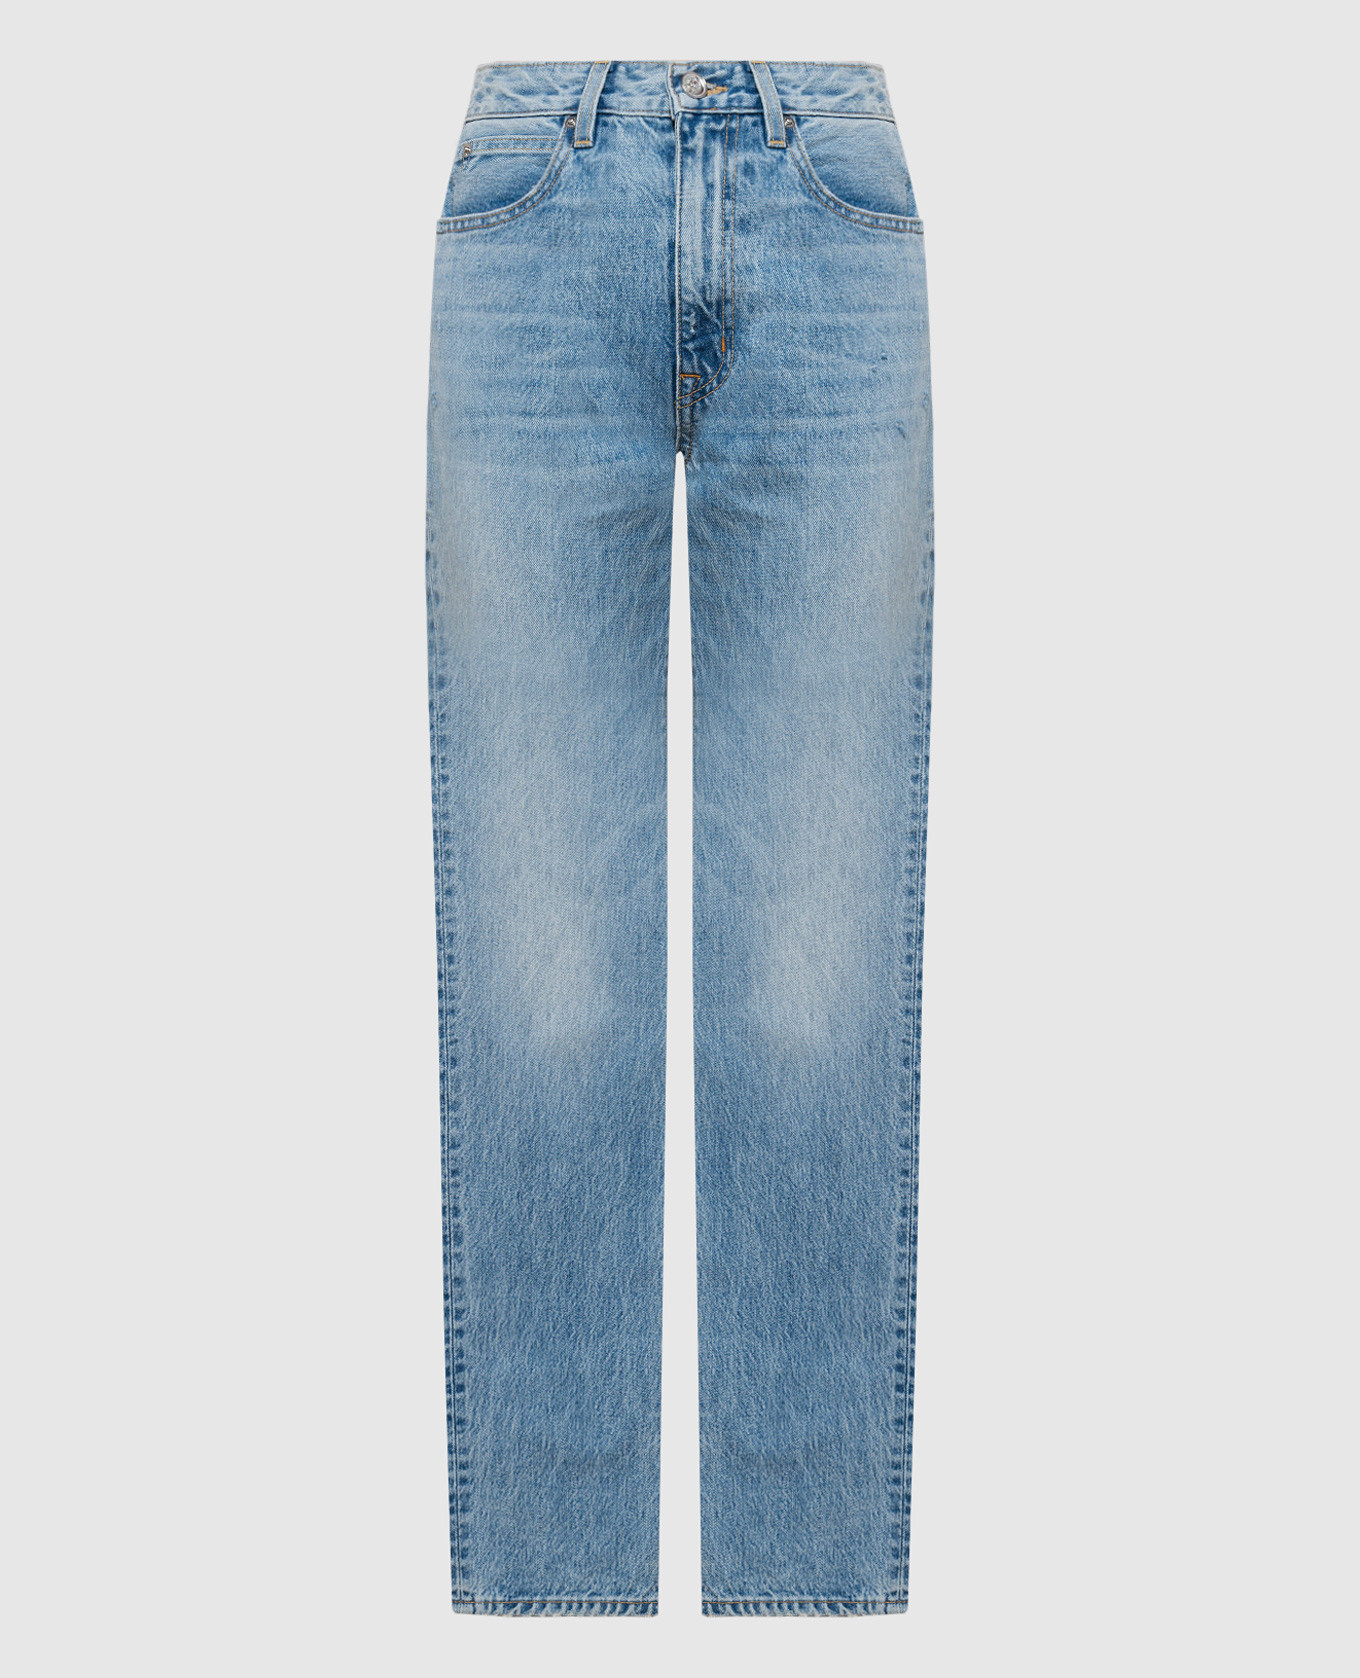 Blue jeans with a distressed effect